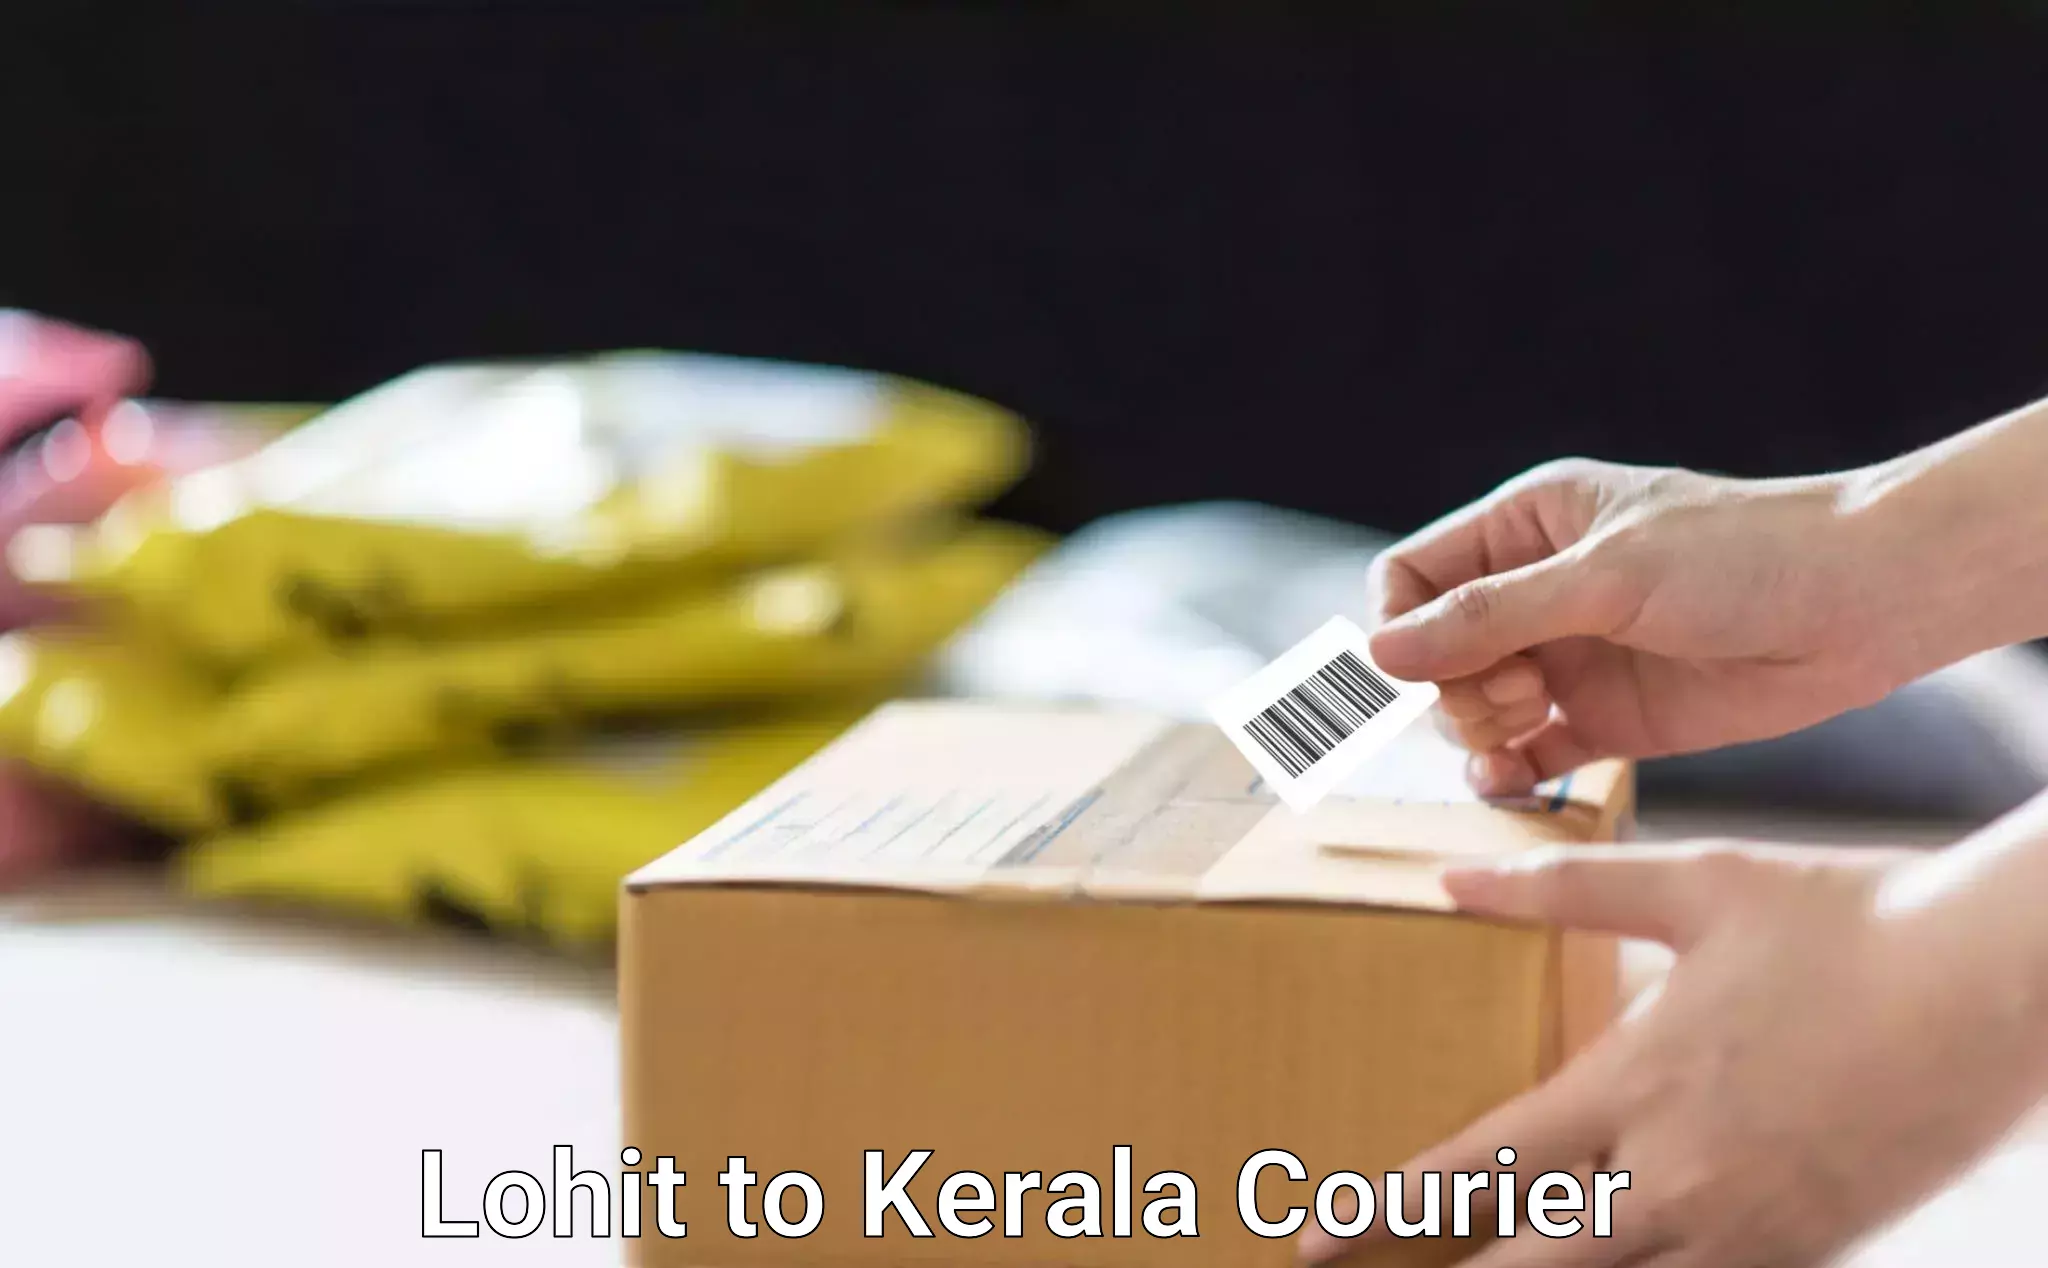 Fast delivery service Lohit to Kozhikode